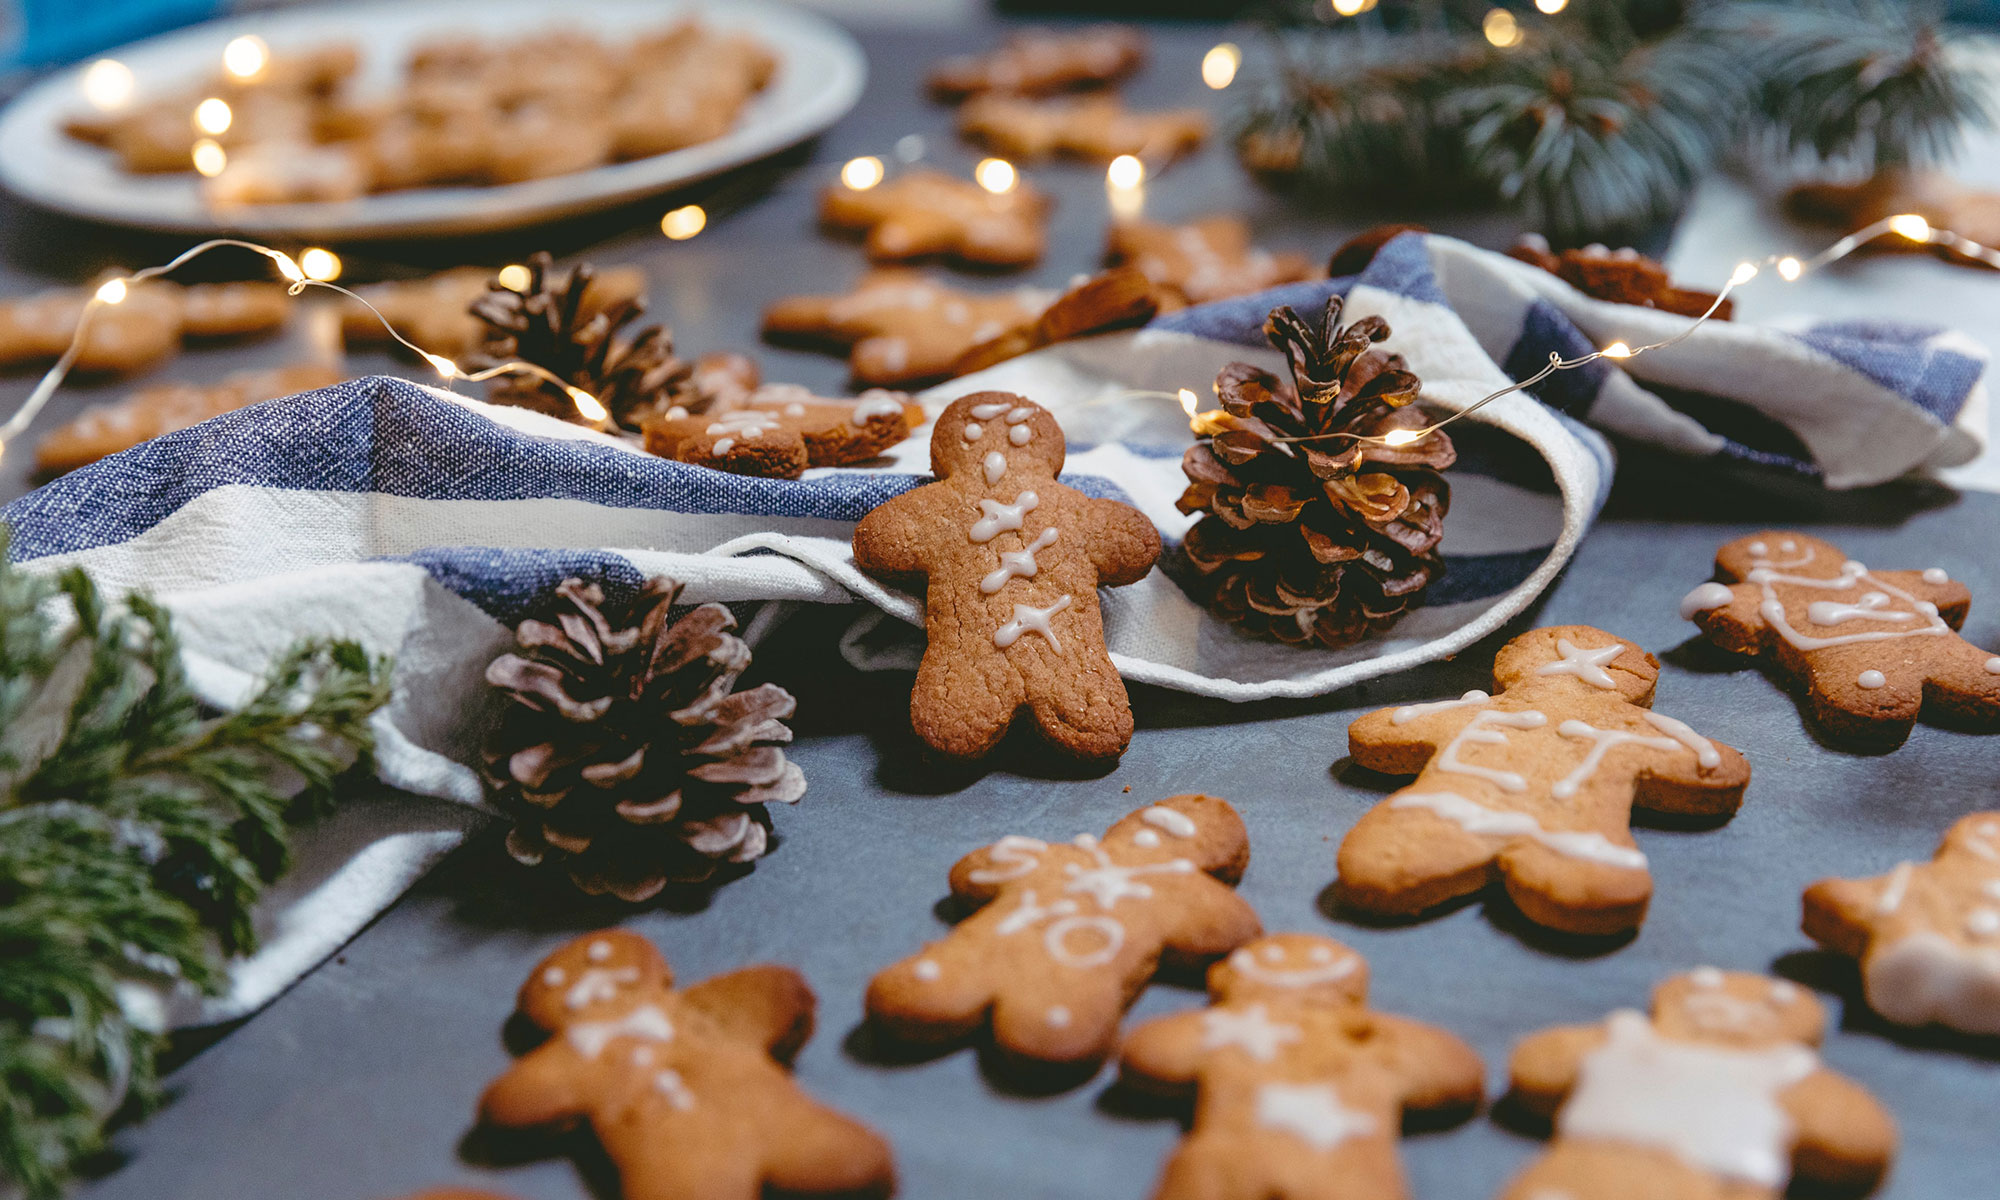 Gingerbread man cookies for Christmas